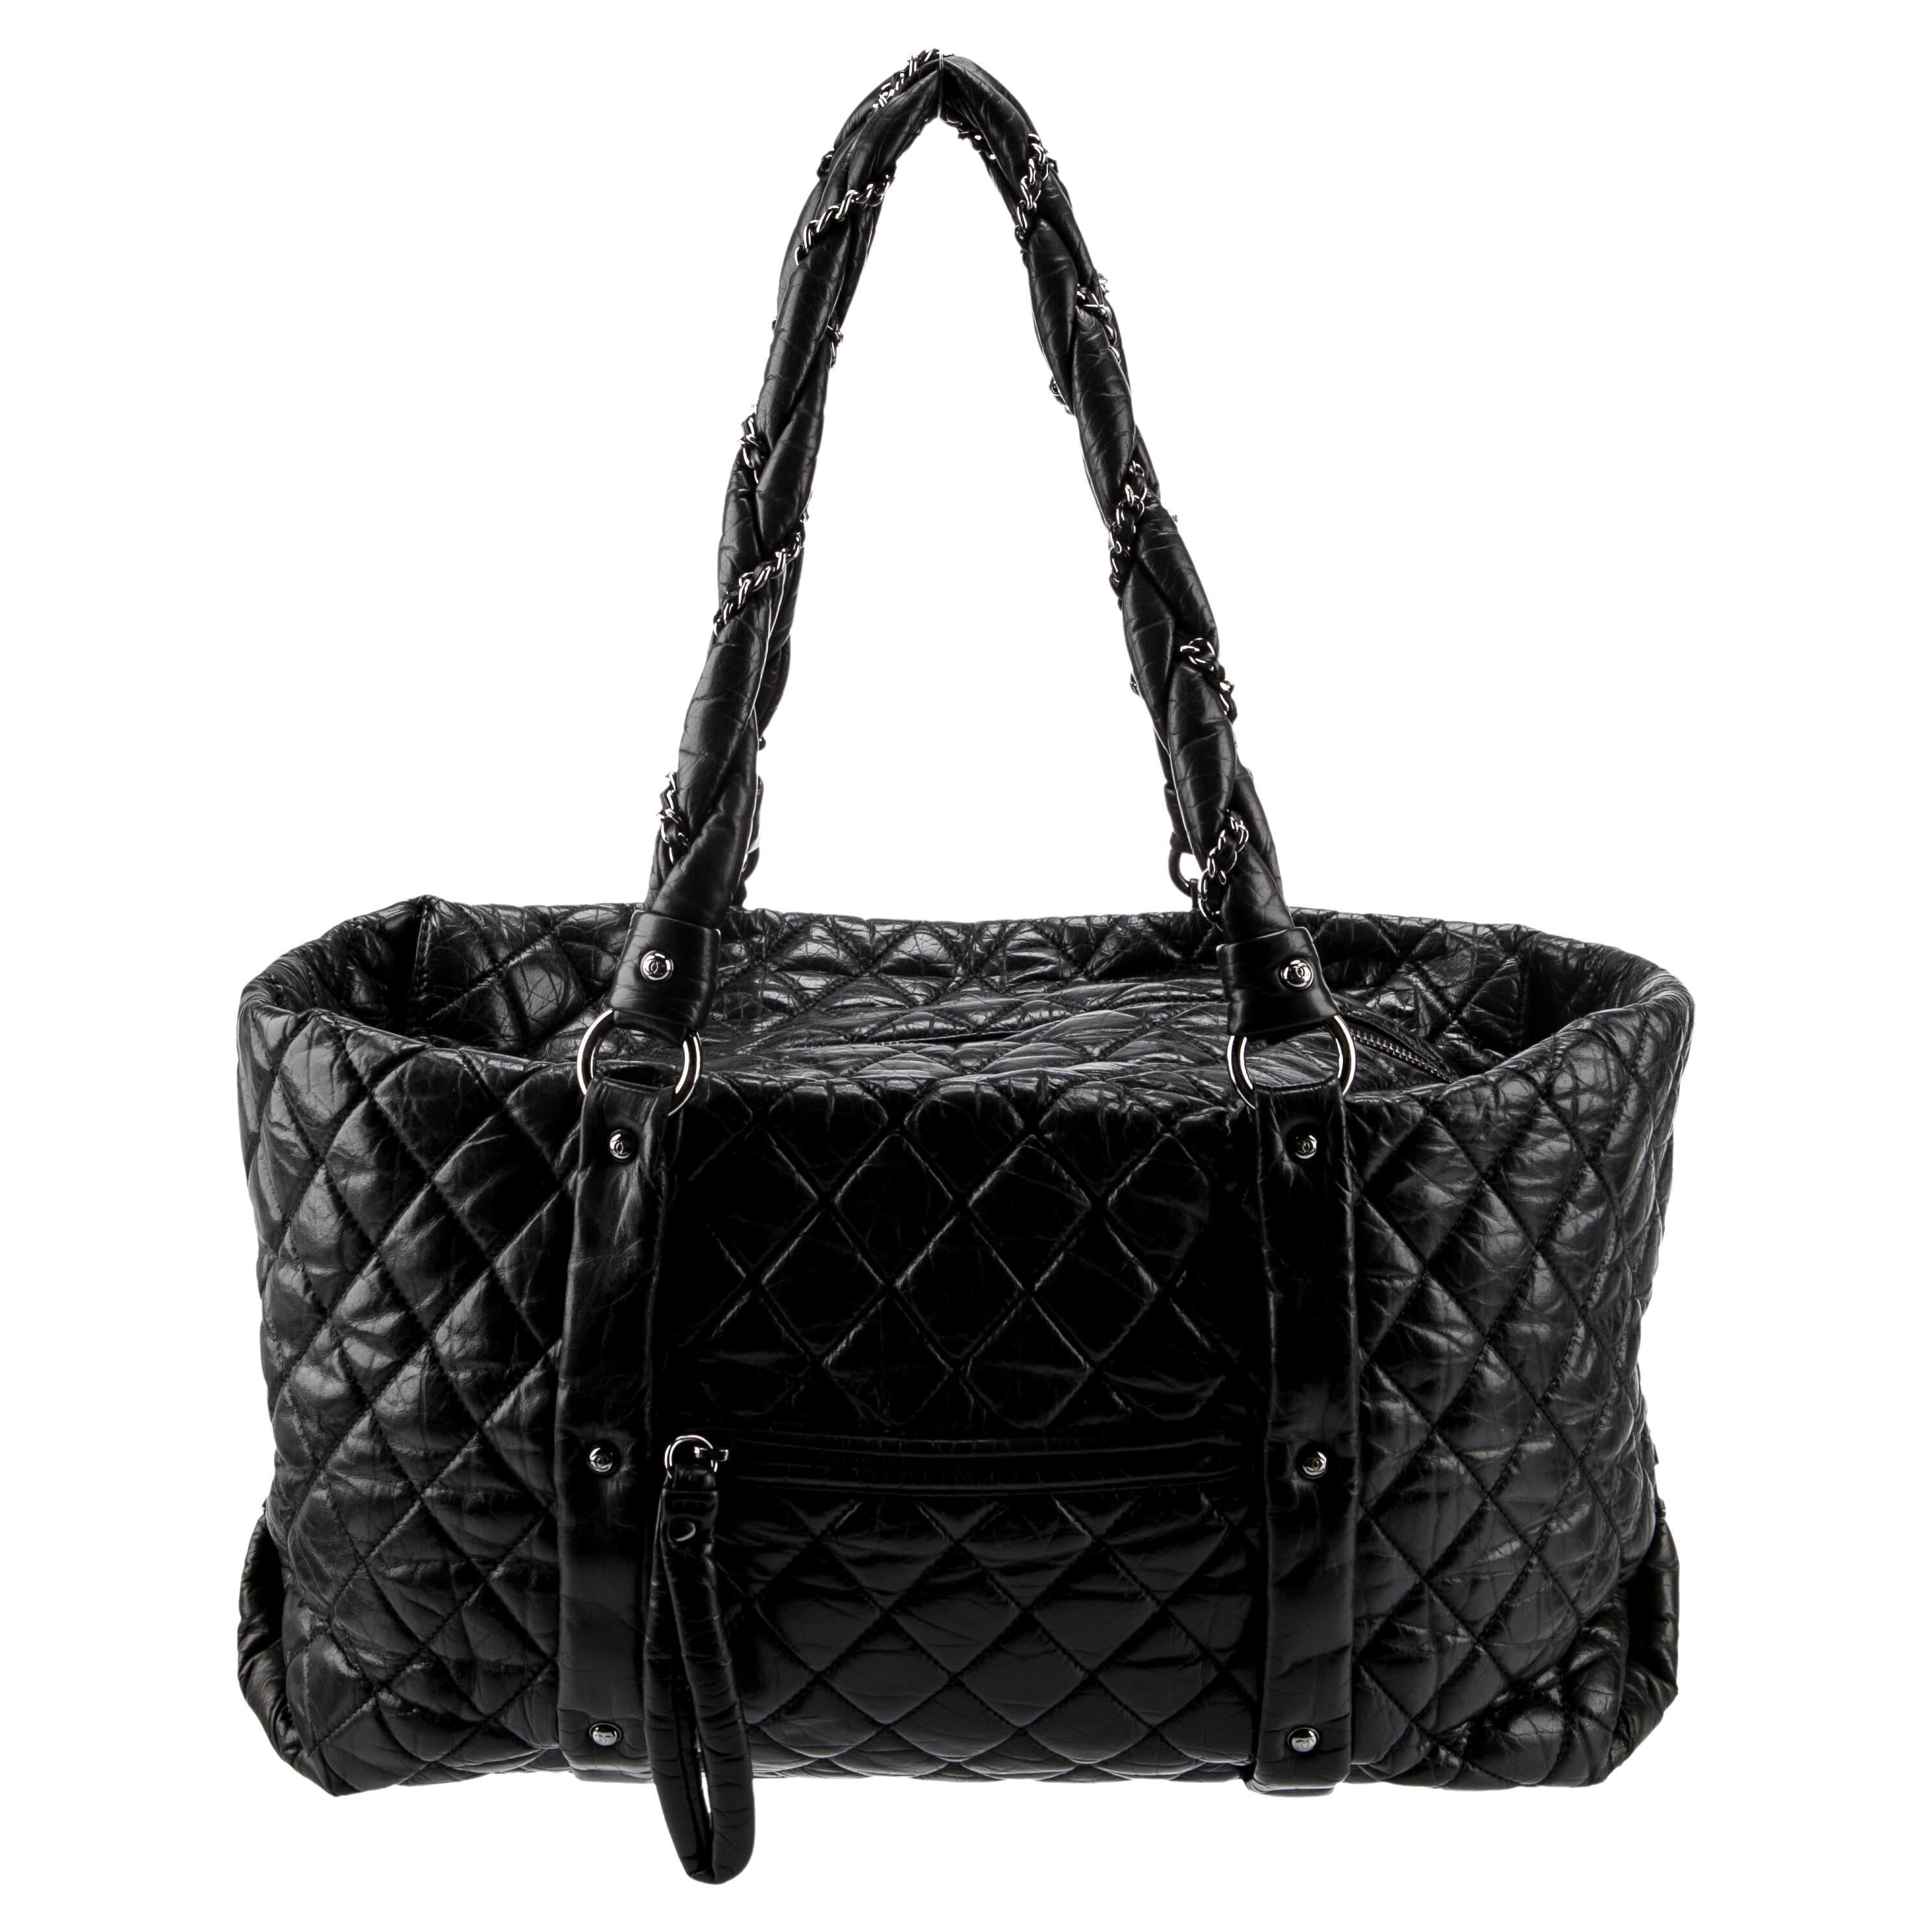 Chanel 2006 Soft Plush Quilted Distressed Leather Large Carry-On Travel Tote Bag For Sale 1